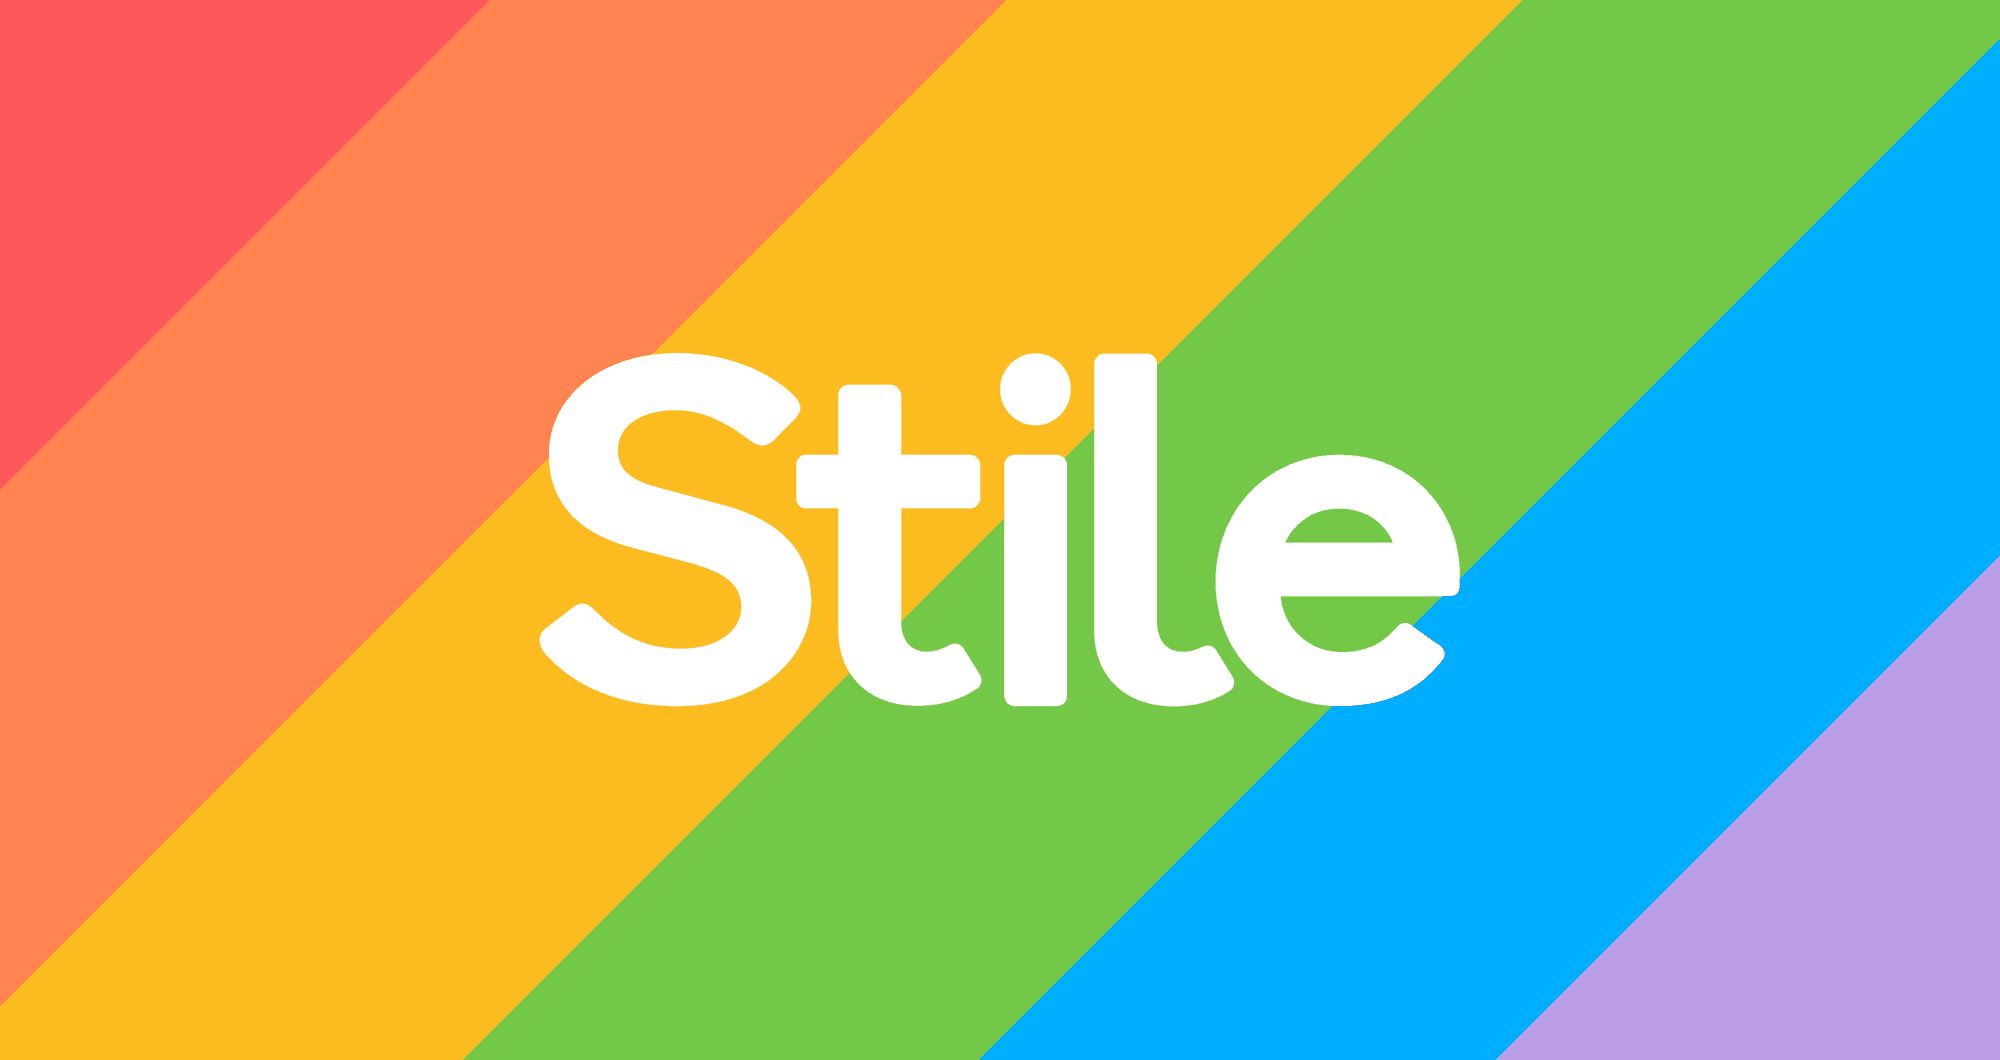 The Stile logo with a background of diagonal rainbow stripes